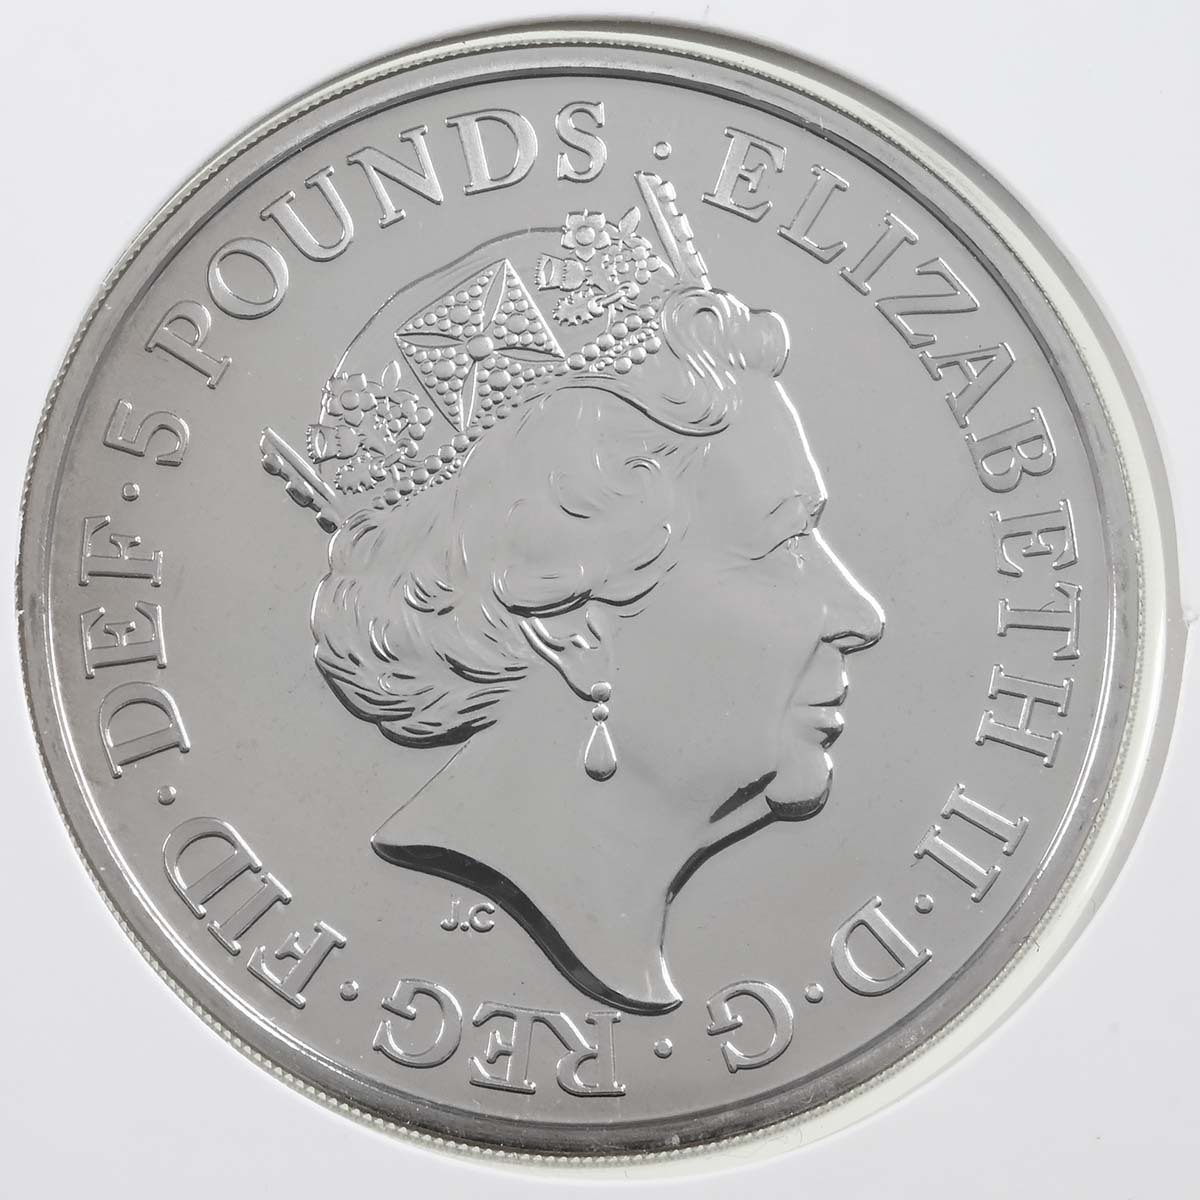 UK18PGBU 2018 Prince George 5th Birthday Five Pound Crown Brilliant Uncirculated Coin In Folder Obverse